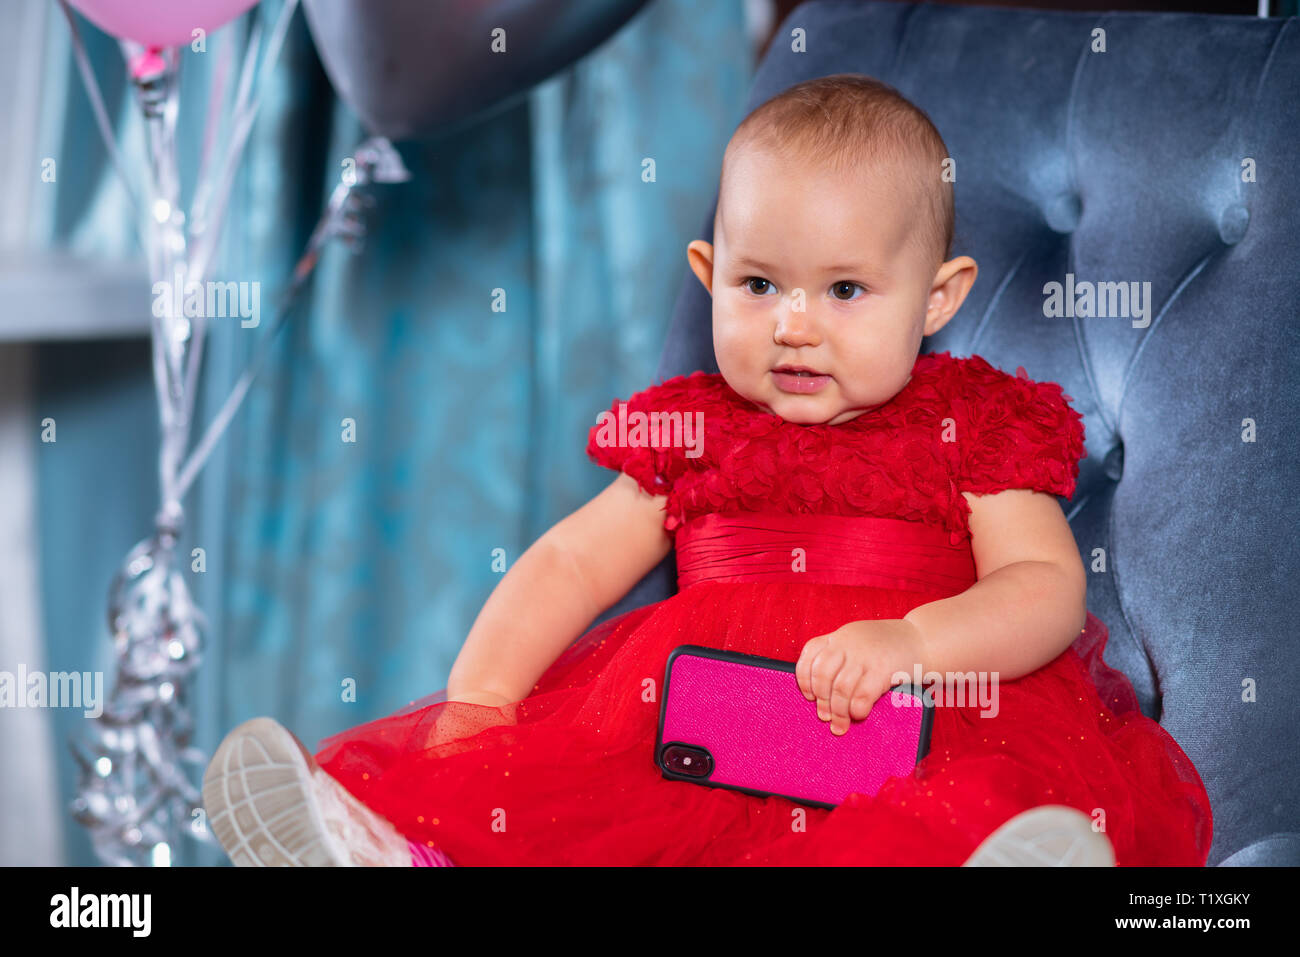 Cute little child girl in festive red dress with big smartphone in her hand, sitting on blue velvet chair with balloons in background and smiling Stock Photo